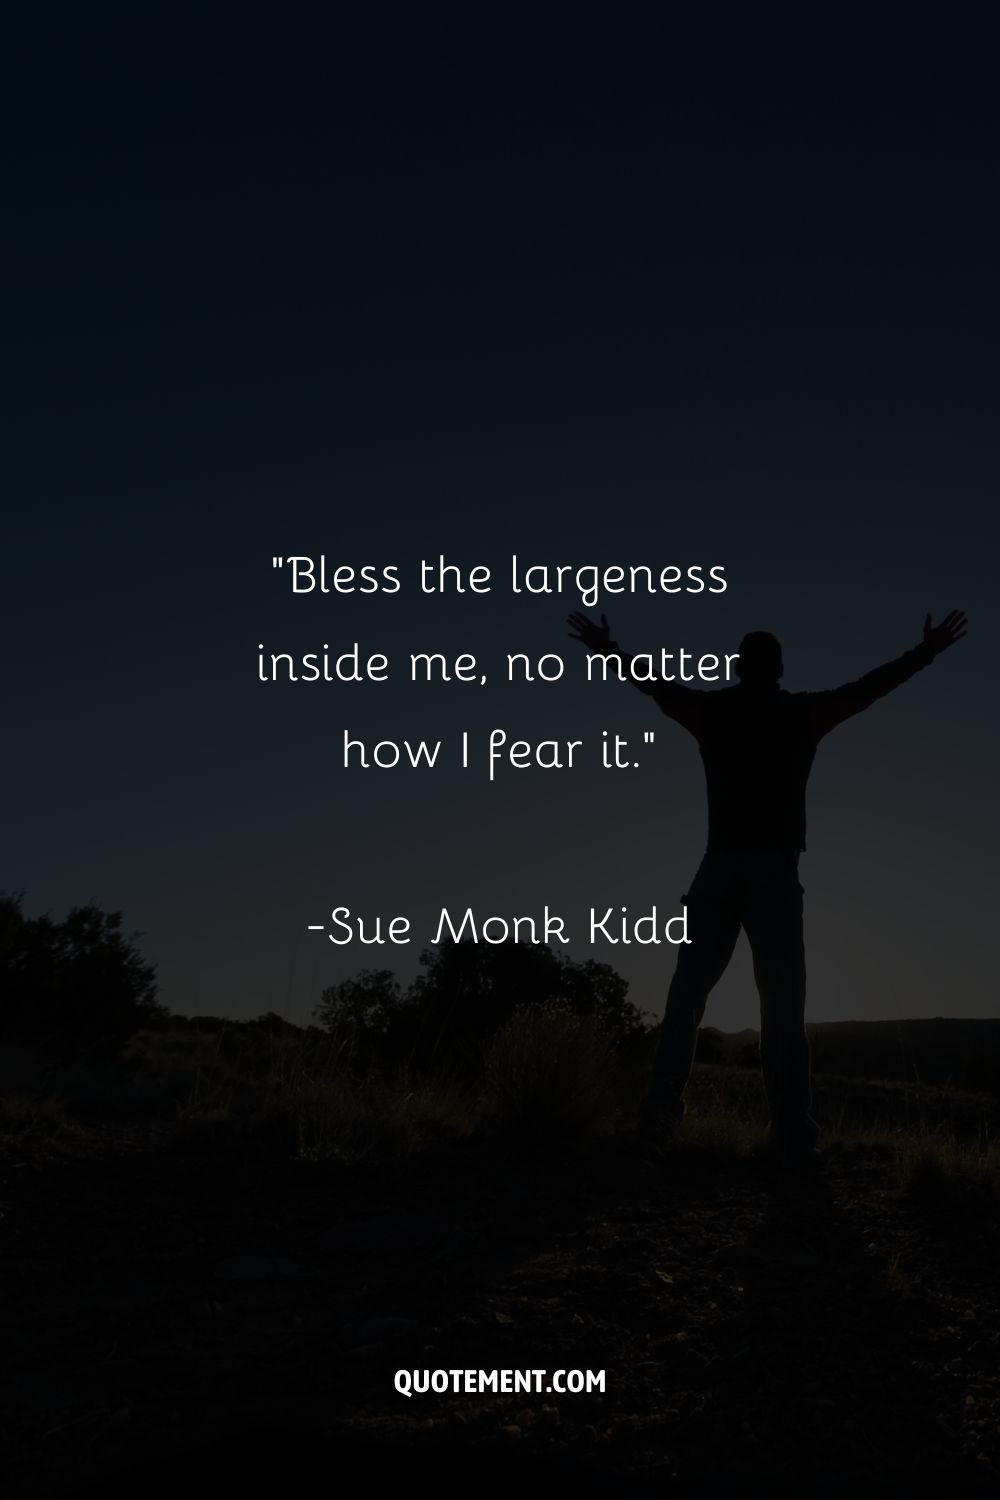 “Bless the largeness inside me, no matter how I fear it.”